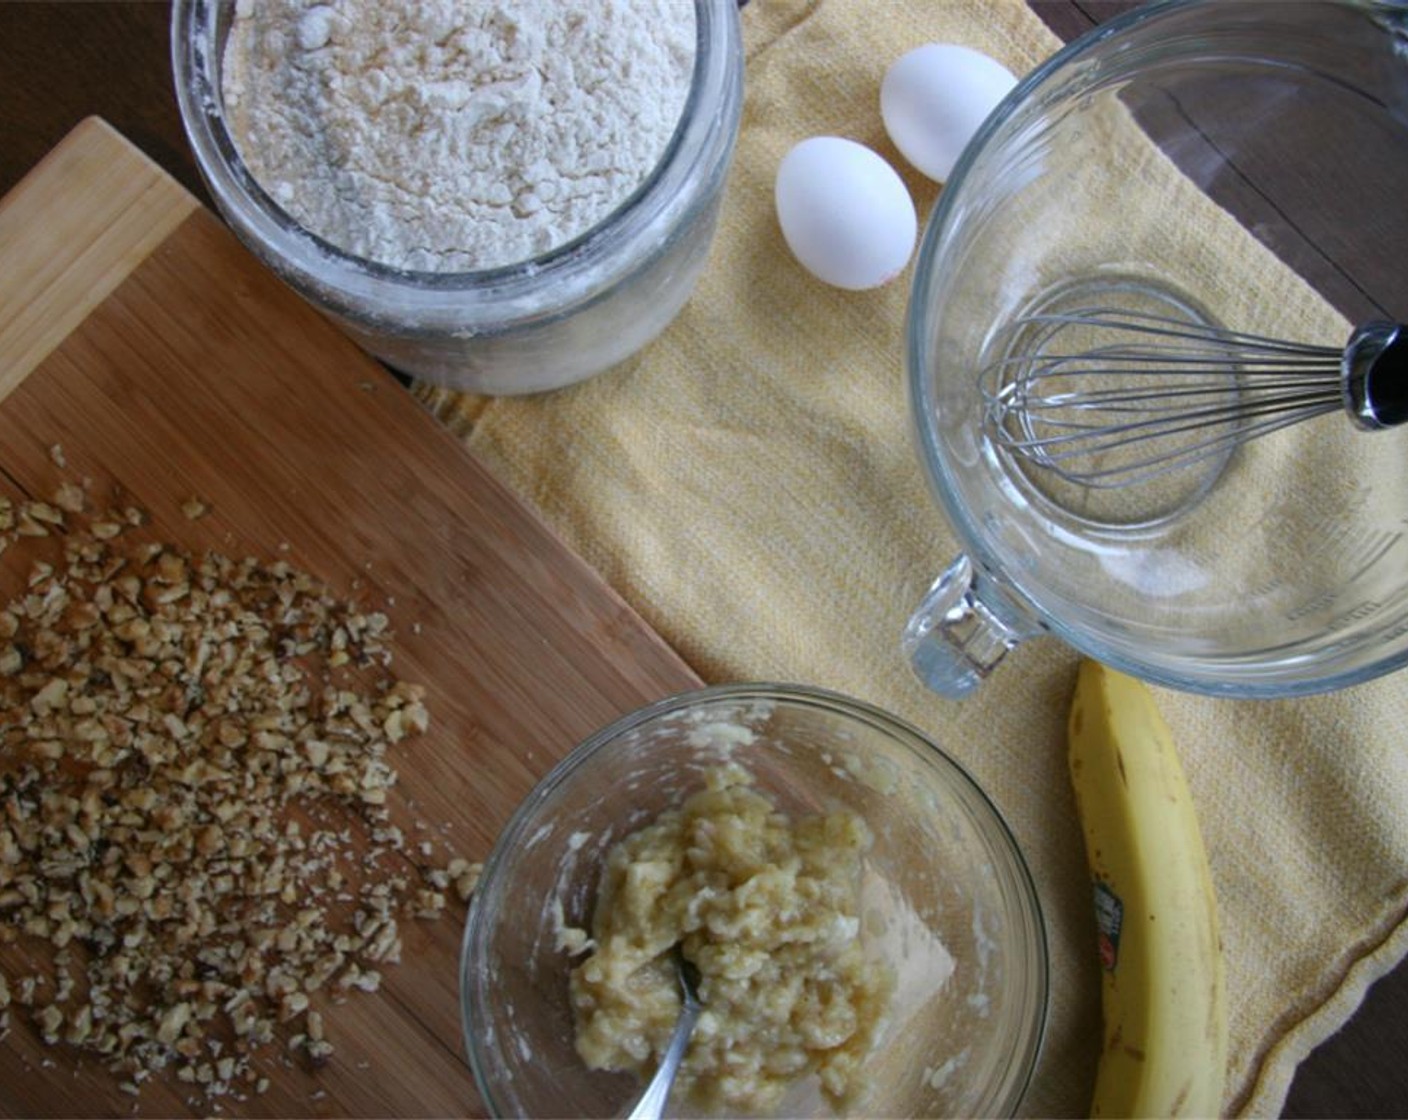 step 2 Add the All-Purpose Flour (2 cups), Granulated Sugar (1 Tbsp), Baking Powder (1 Tbsp), and Salt (1/4 tsp) to banana mixture and stir until incorporated.